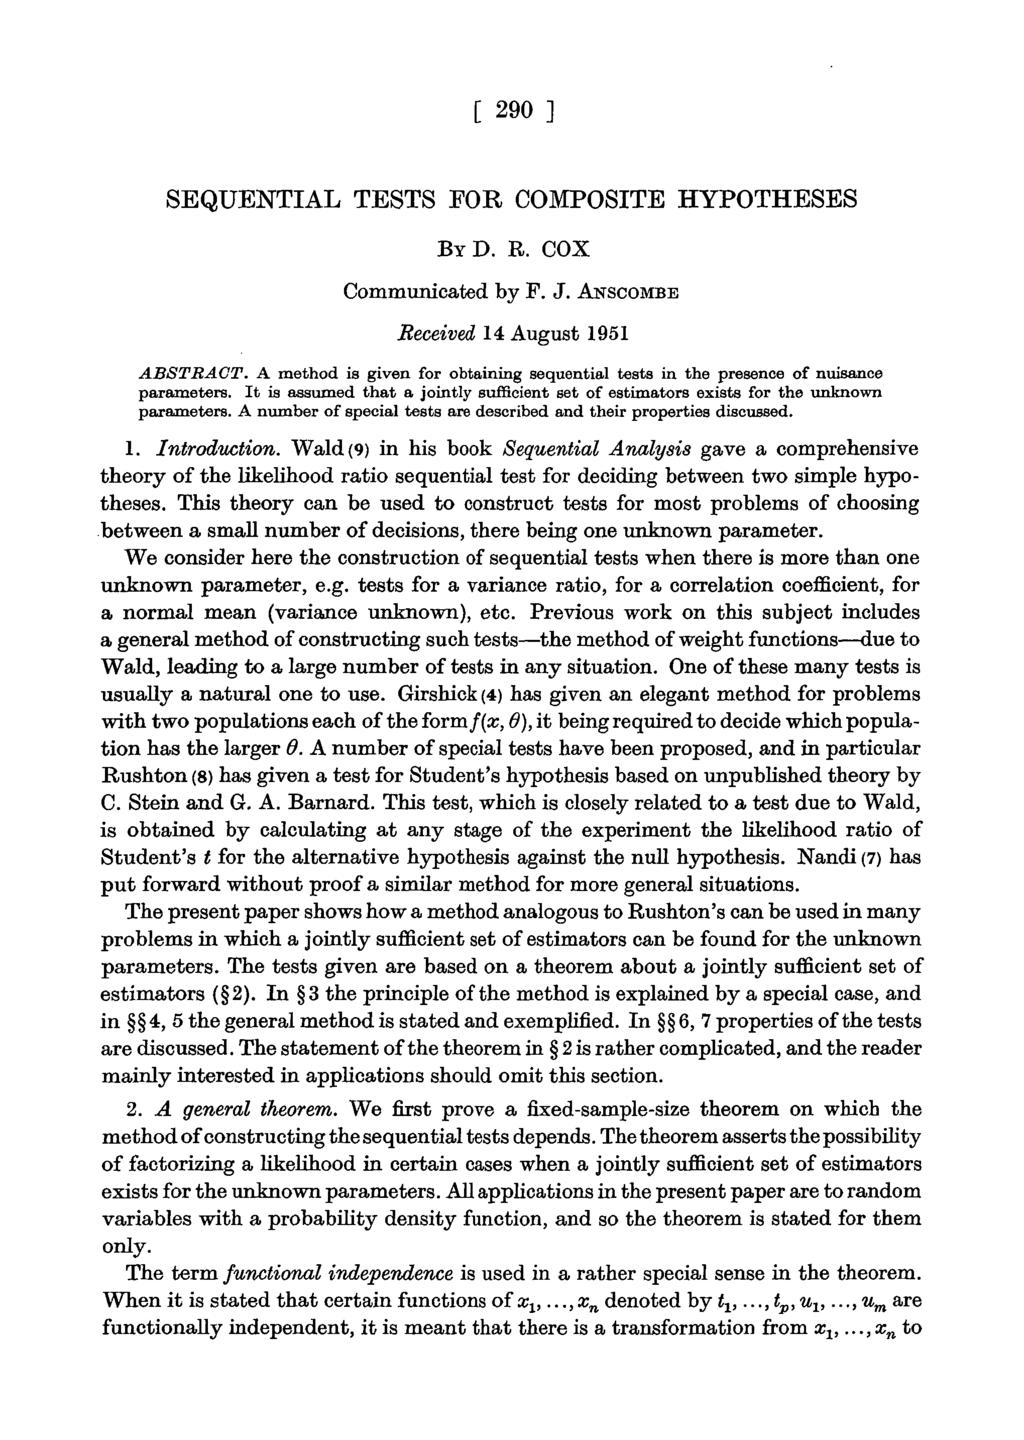 [ 290 ] SEQUENTIAL TESTS FOR COMPOSITE HYPOTHESES BYD. R. COX Communicated by F. J. ANSCOMBE Beceived 14 August 1951 ABSTRACT.